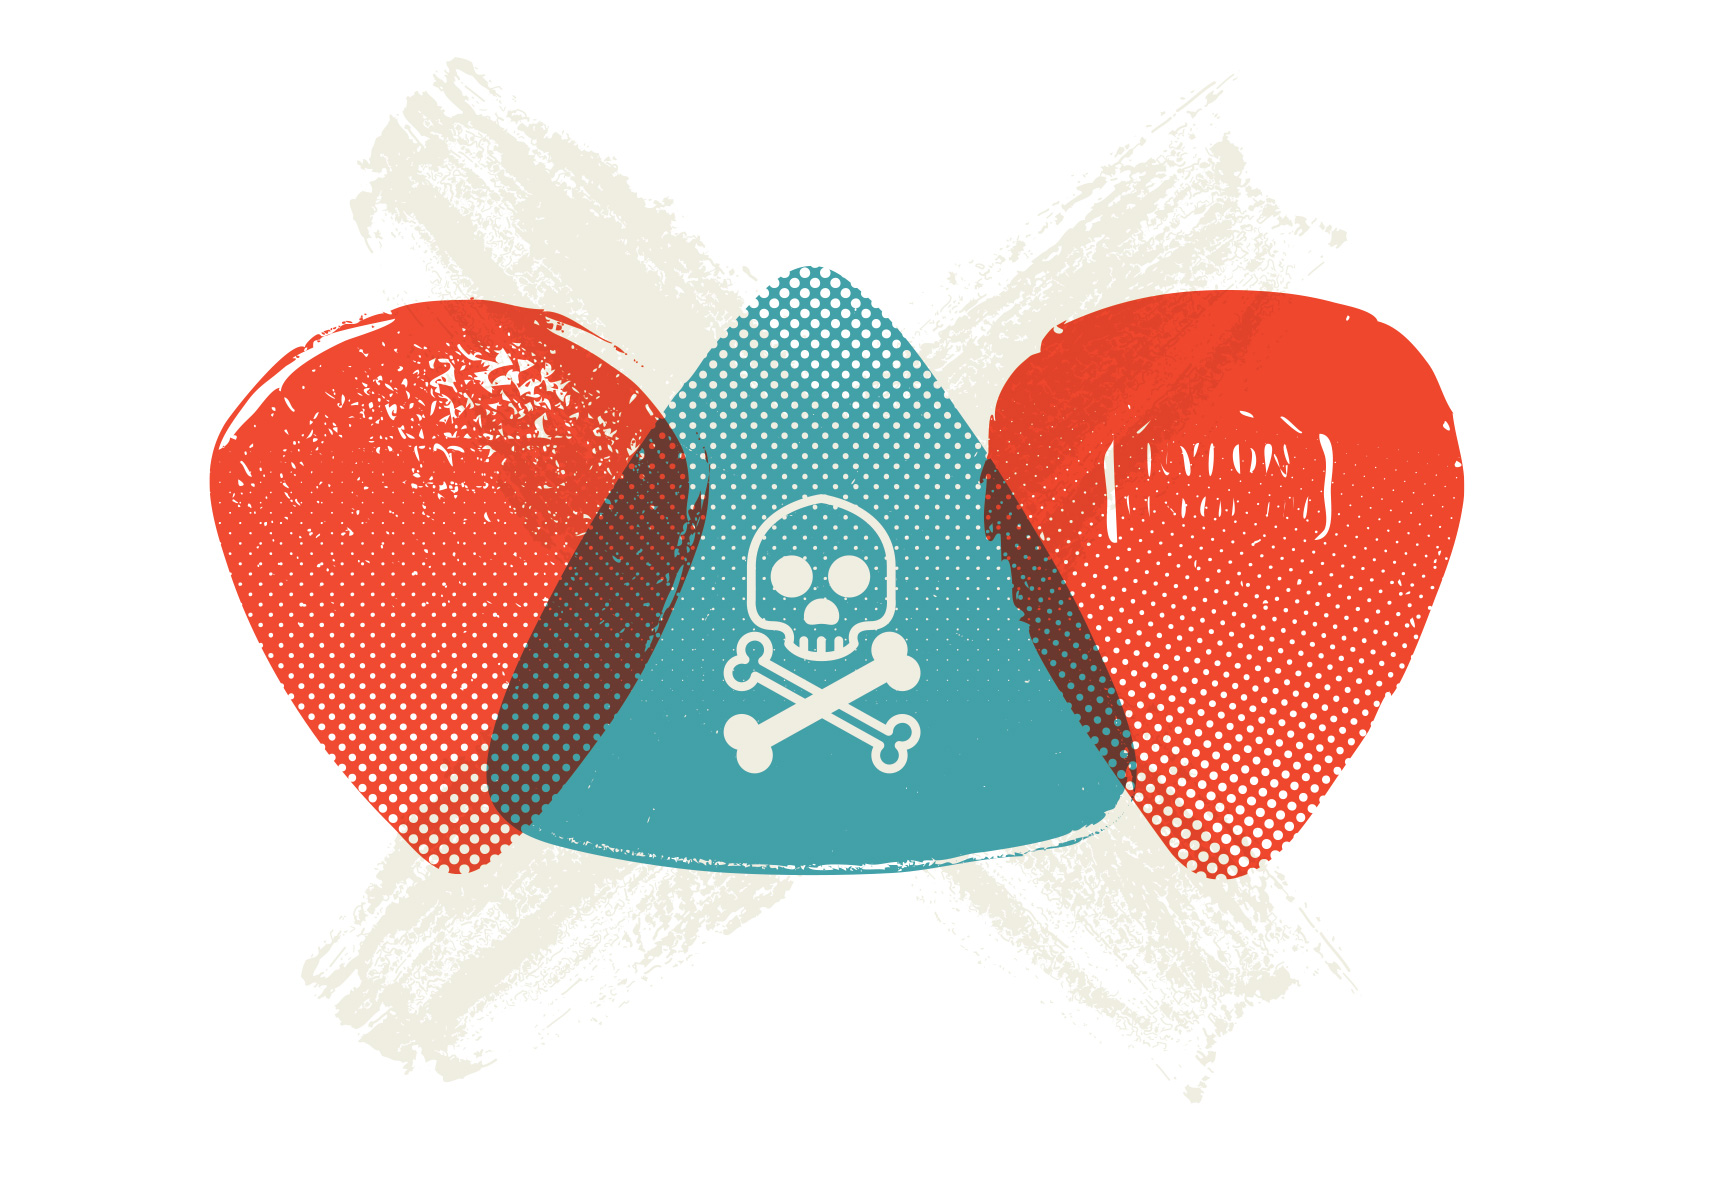 Spot illustration of guitar picks by Jason Malmberg for The Little Book of Rock and Roll Wisdom